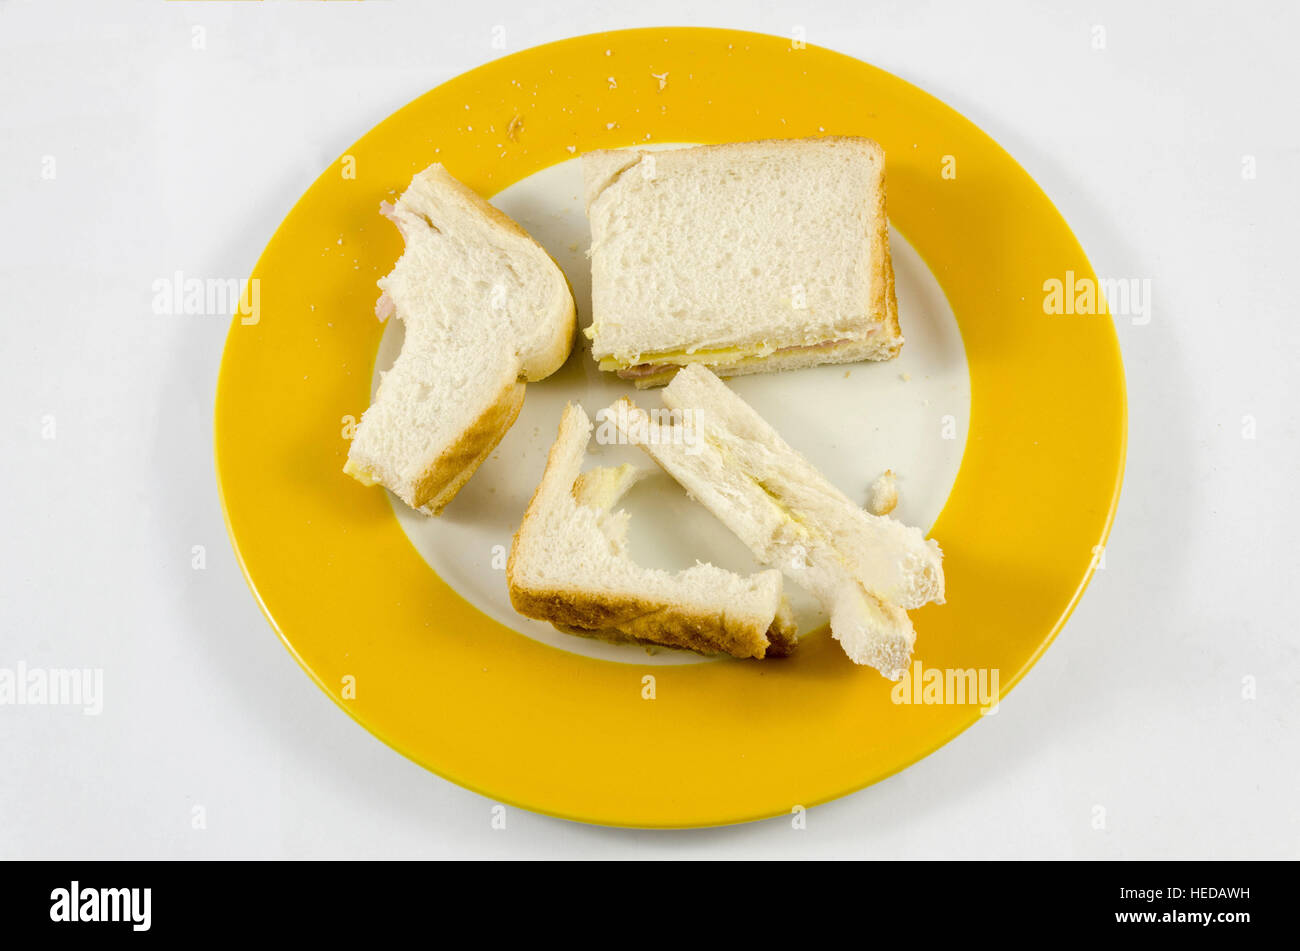 Half-eaten sandwiches on a plated. Stock Photo